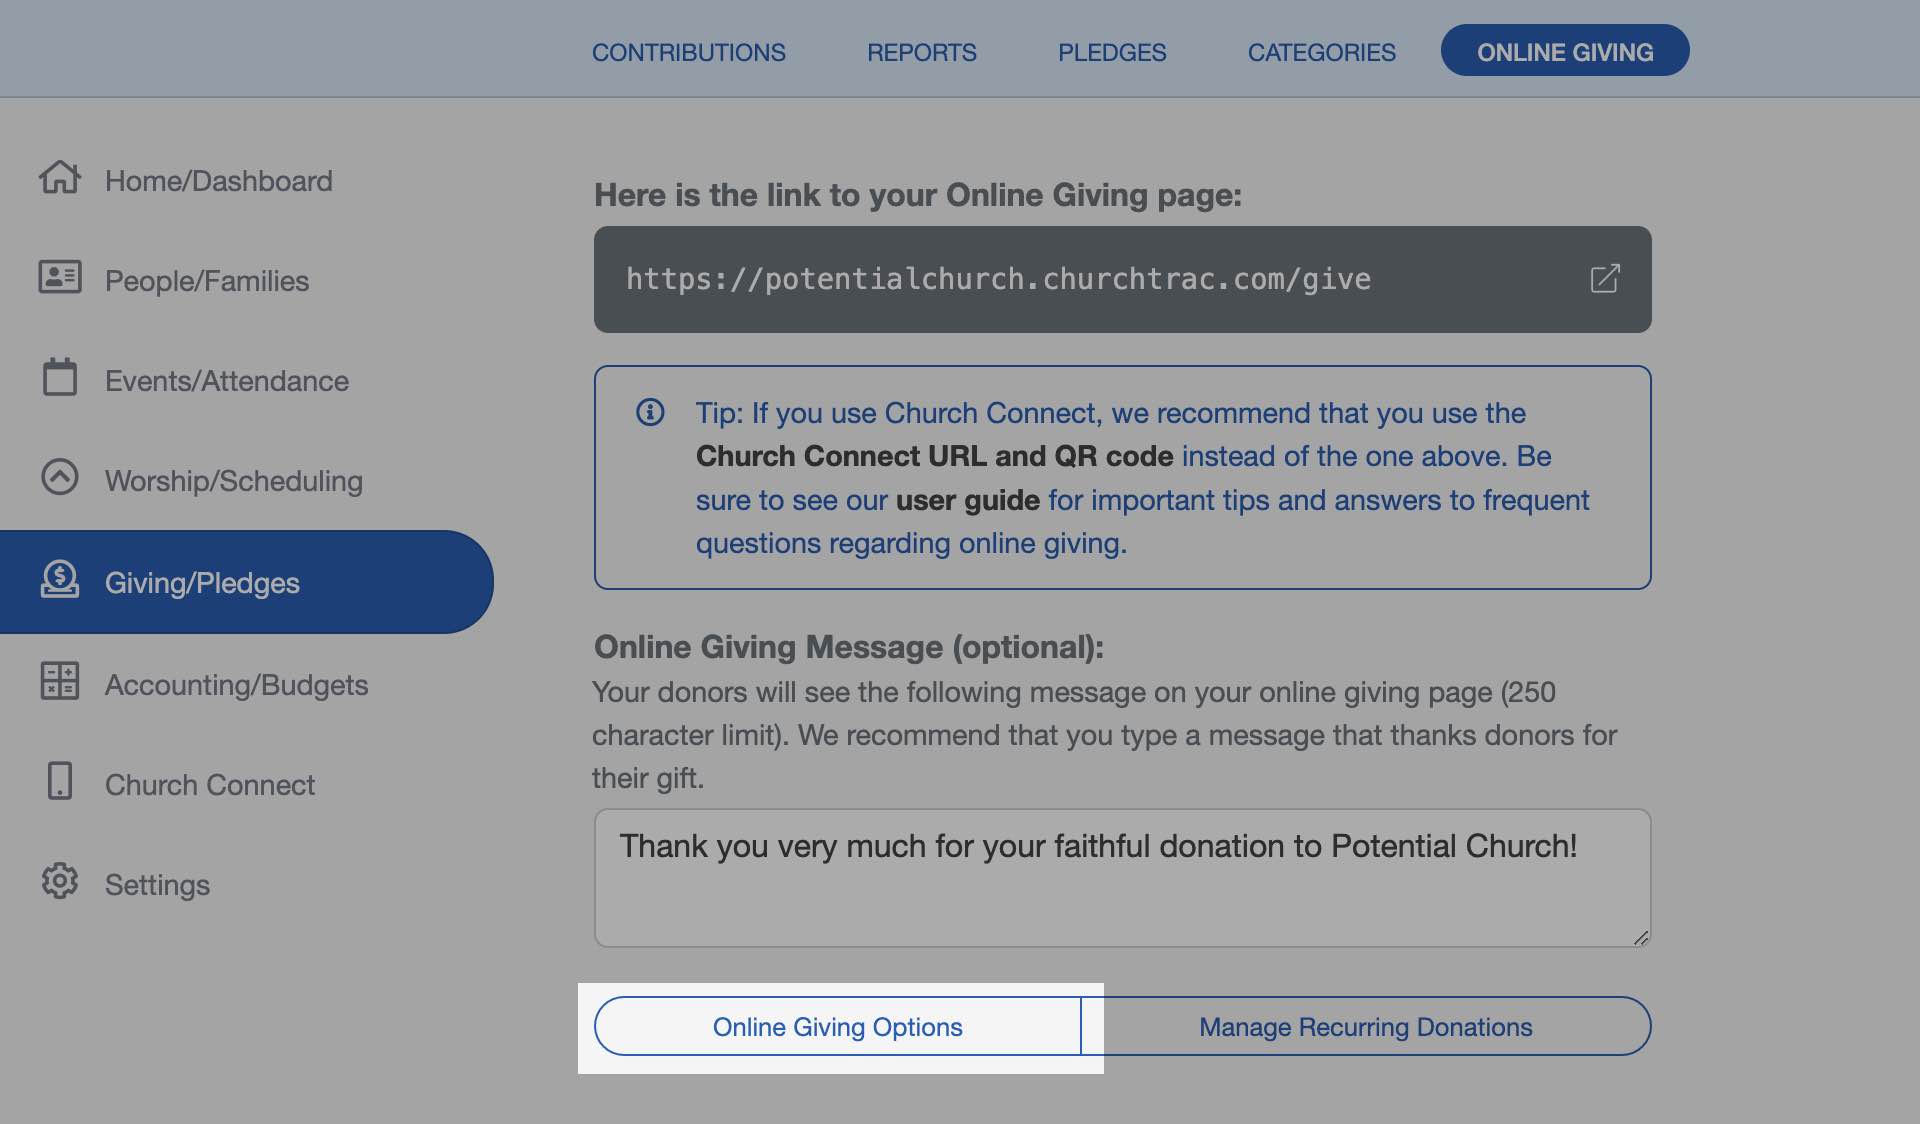 Customize the online giving portal for your church app